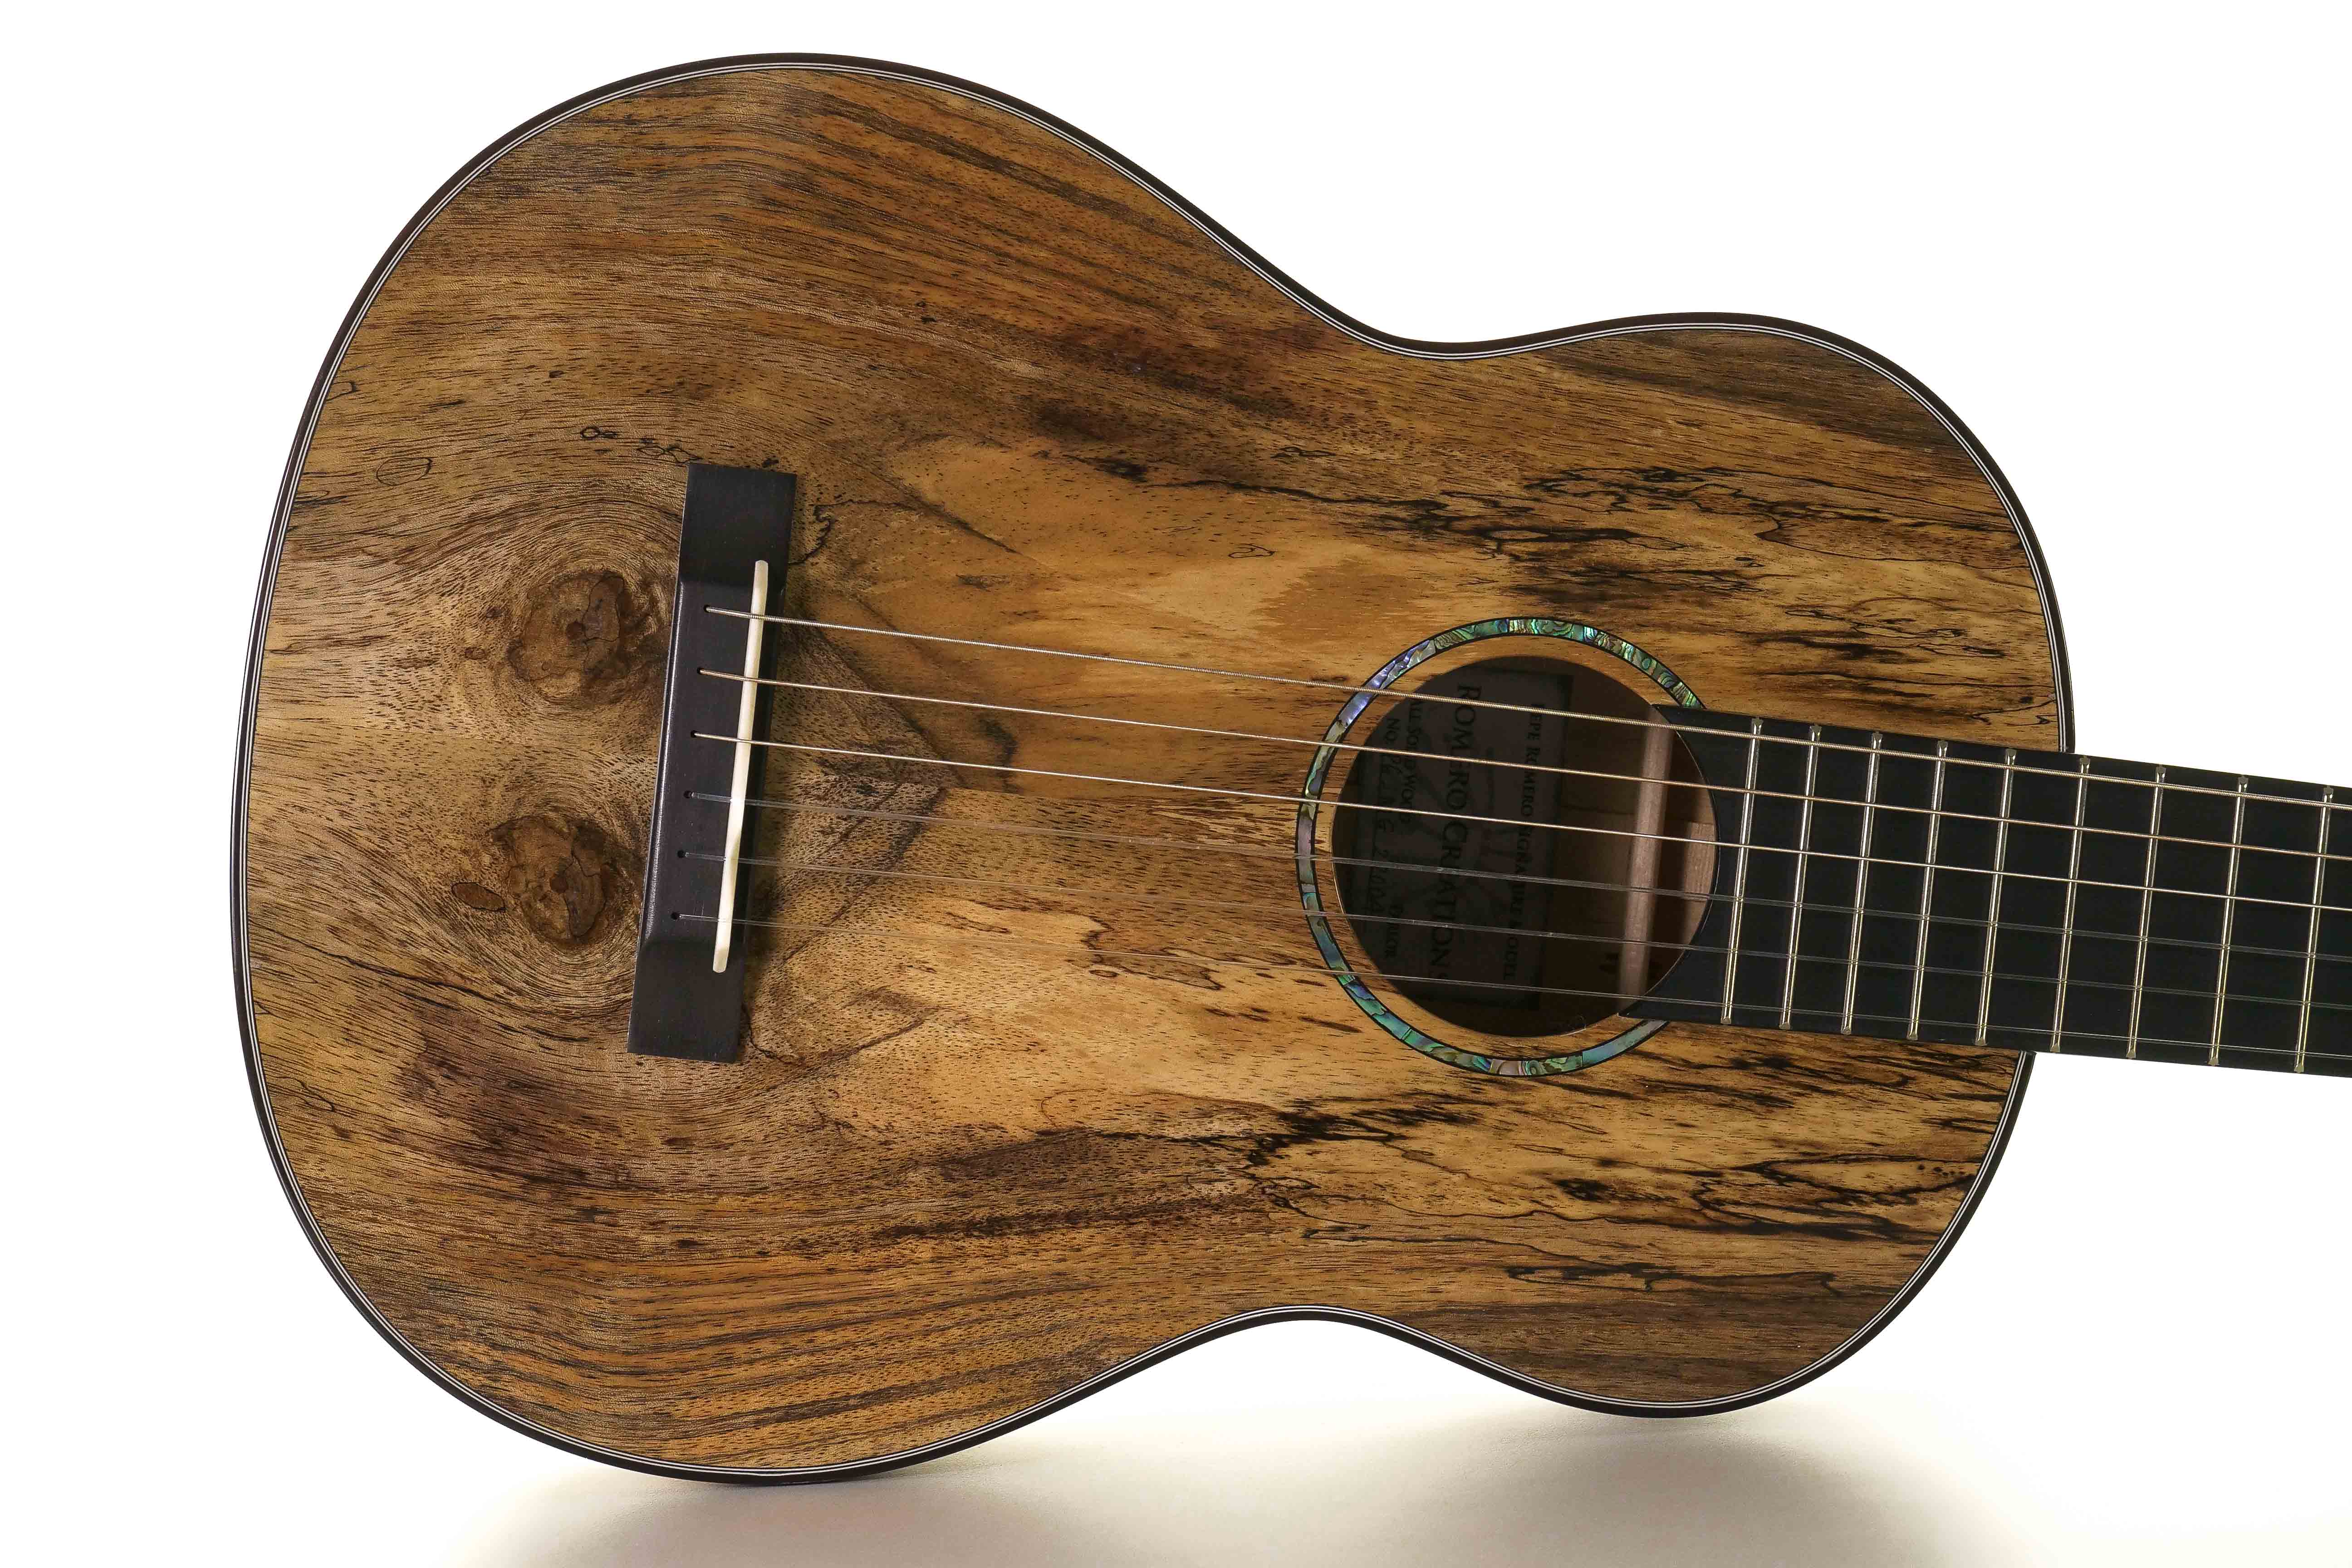 Romero Creations RC-P6-MG Parlor Guitar Spalted Mango "CELIA" LIMITED EDITION